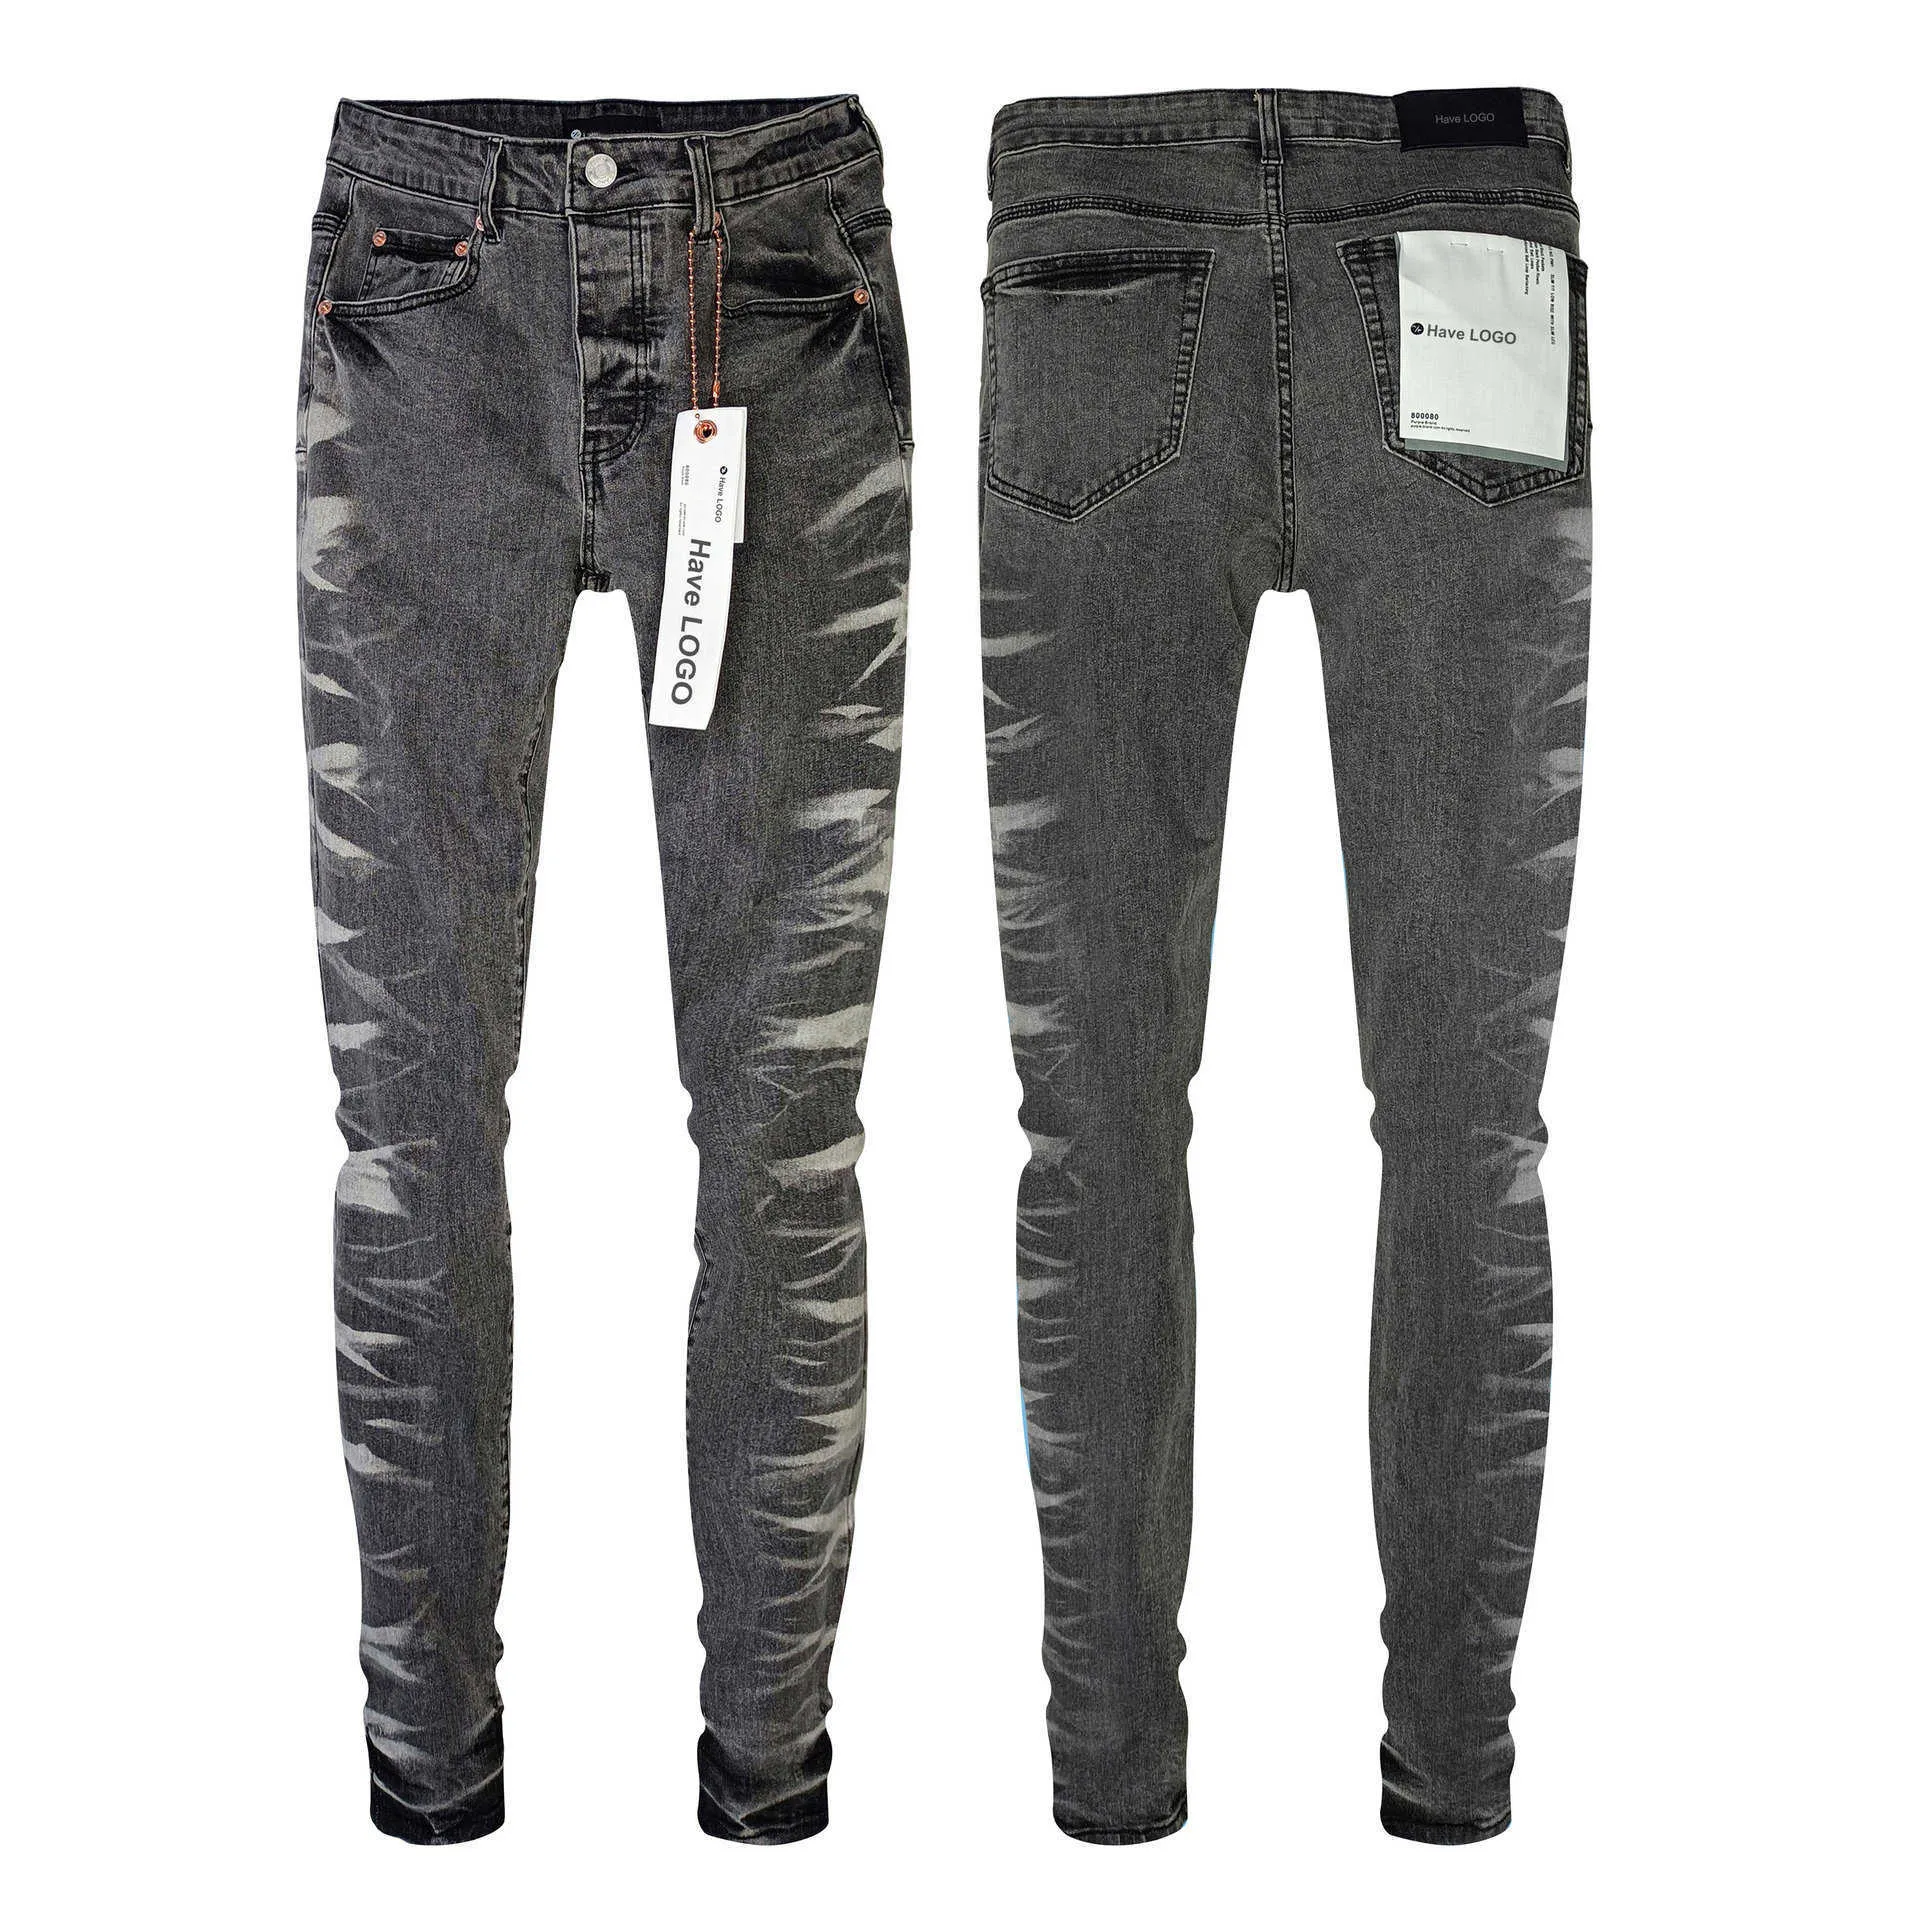 Purple brand American style washed light gray jeans for women and men spring new trendy high street straight leg pants